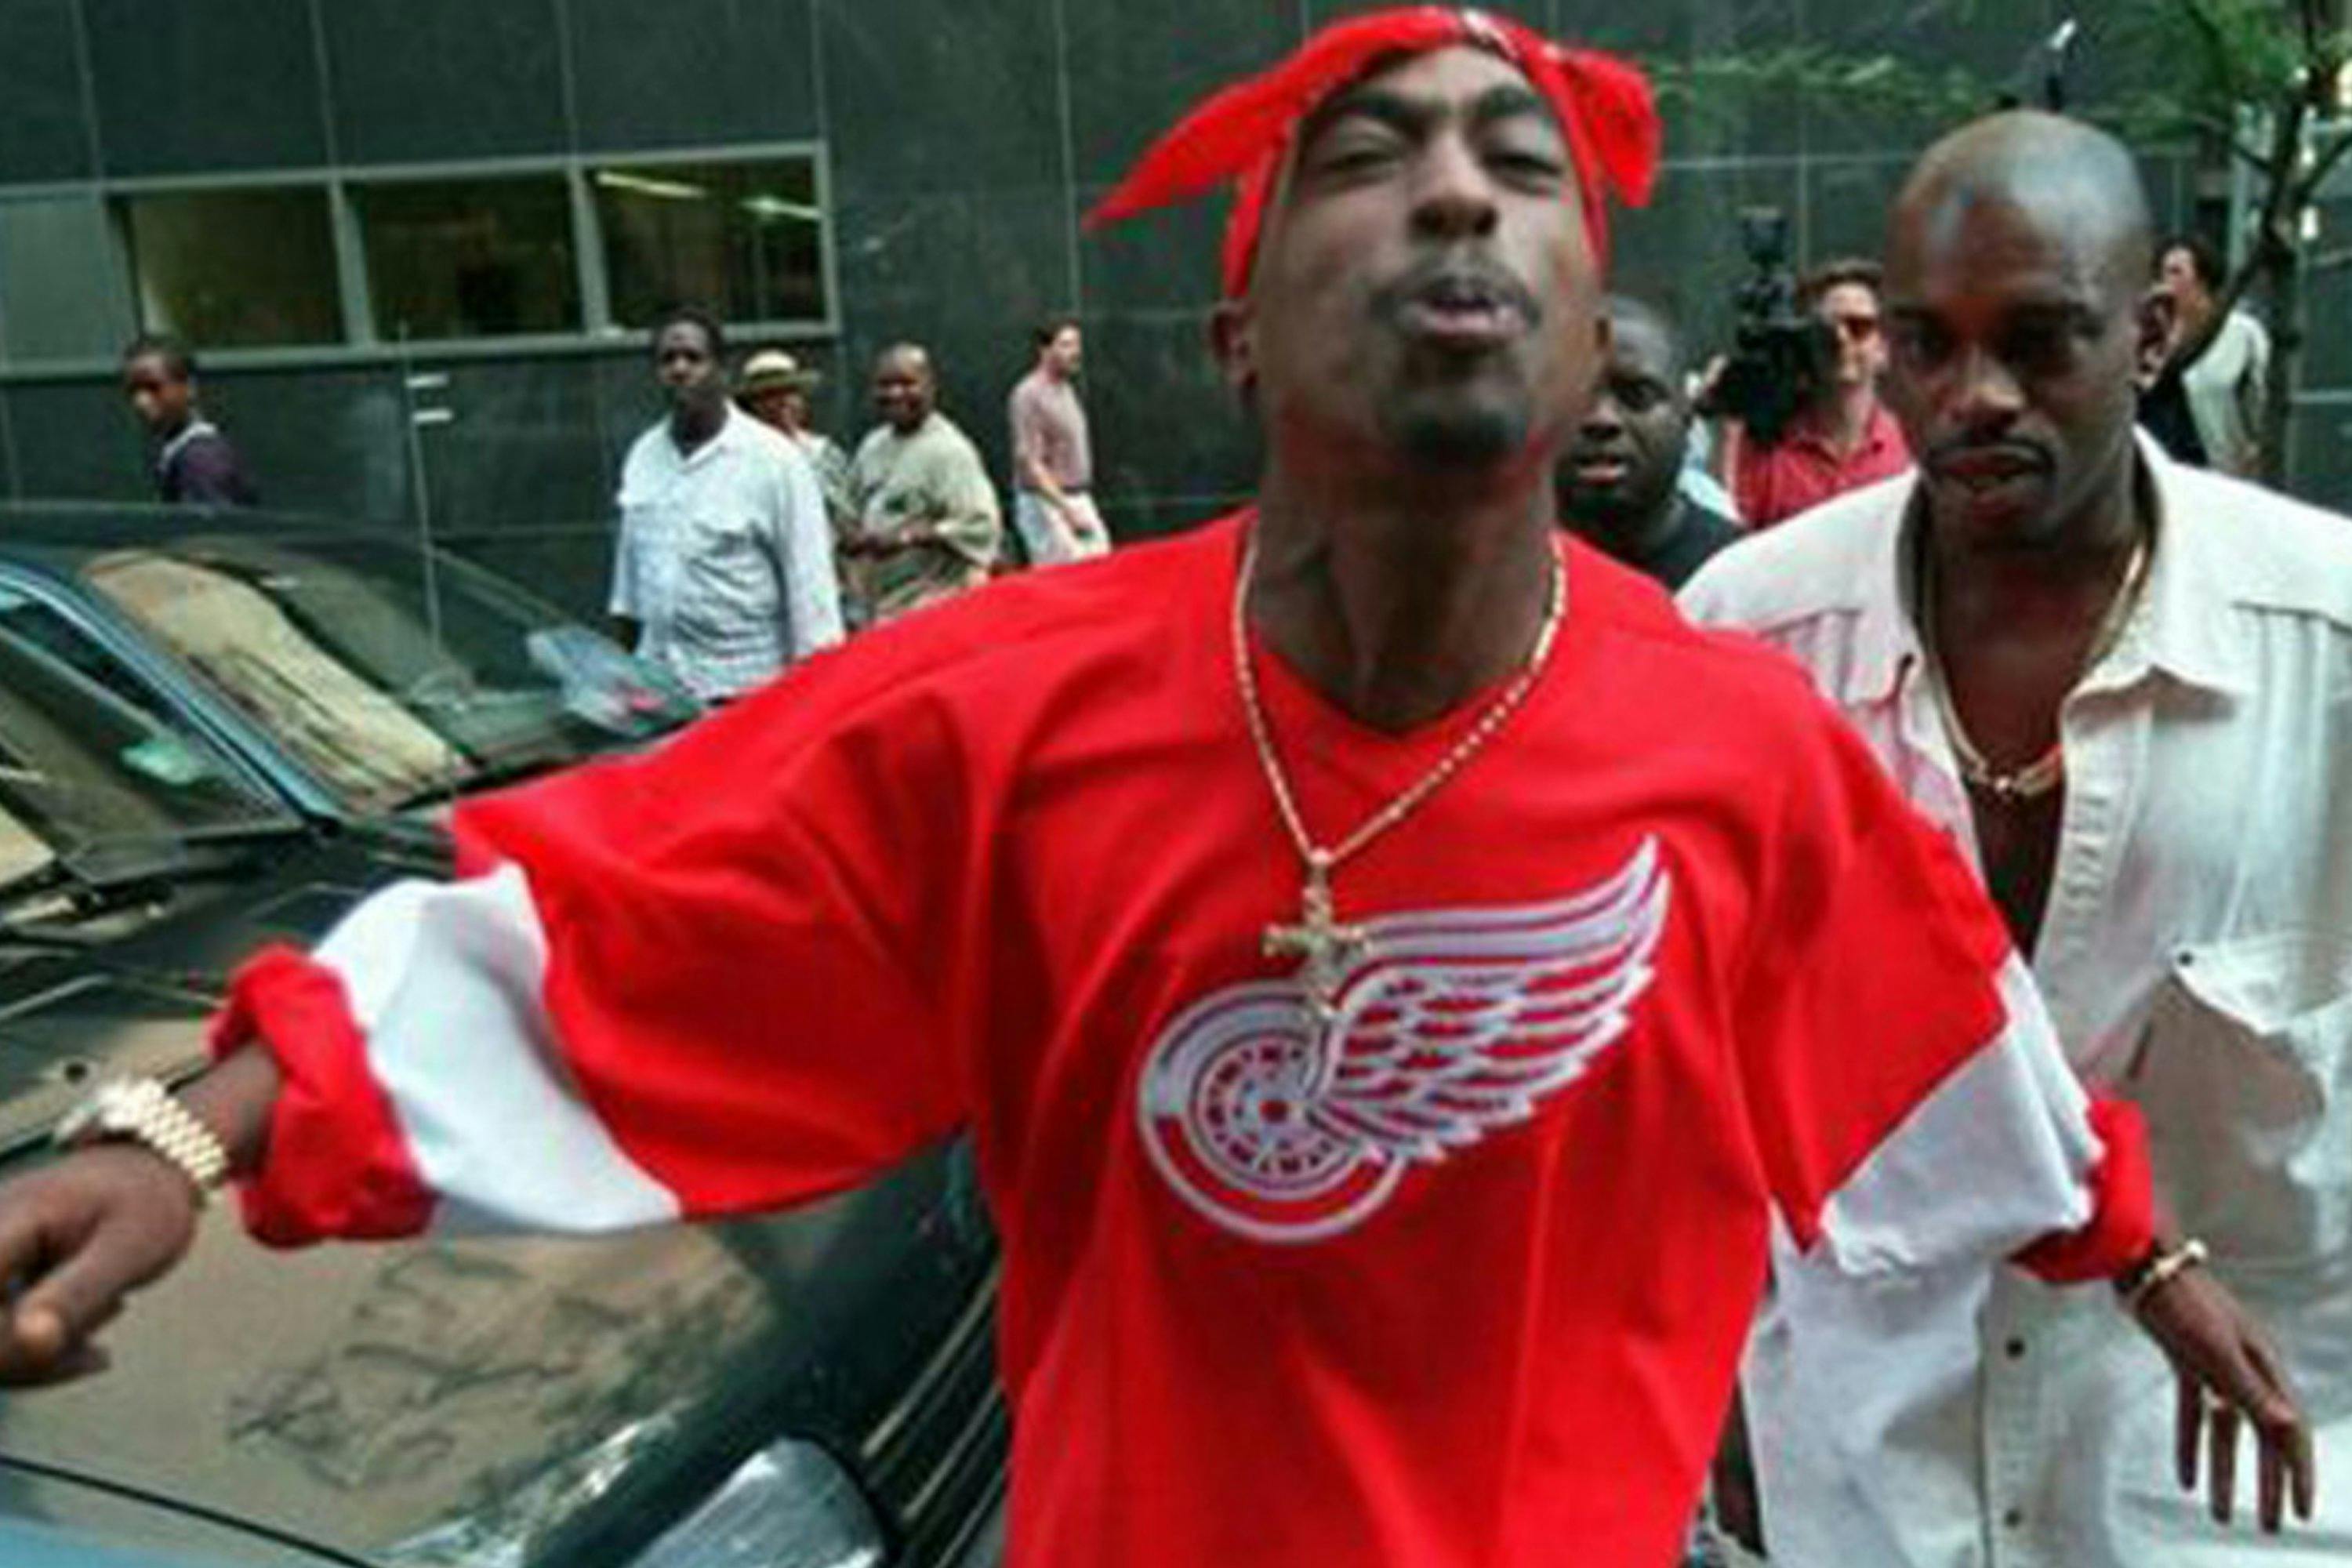 Throwback Fridays: Rappers Wearing Jerseys In 2011 [WHO ROCKED IT